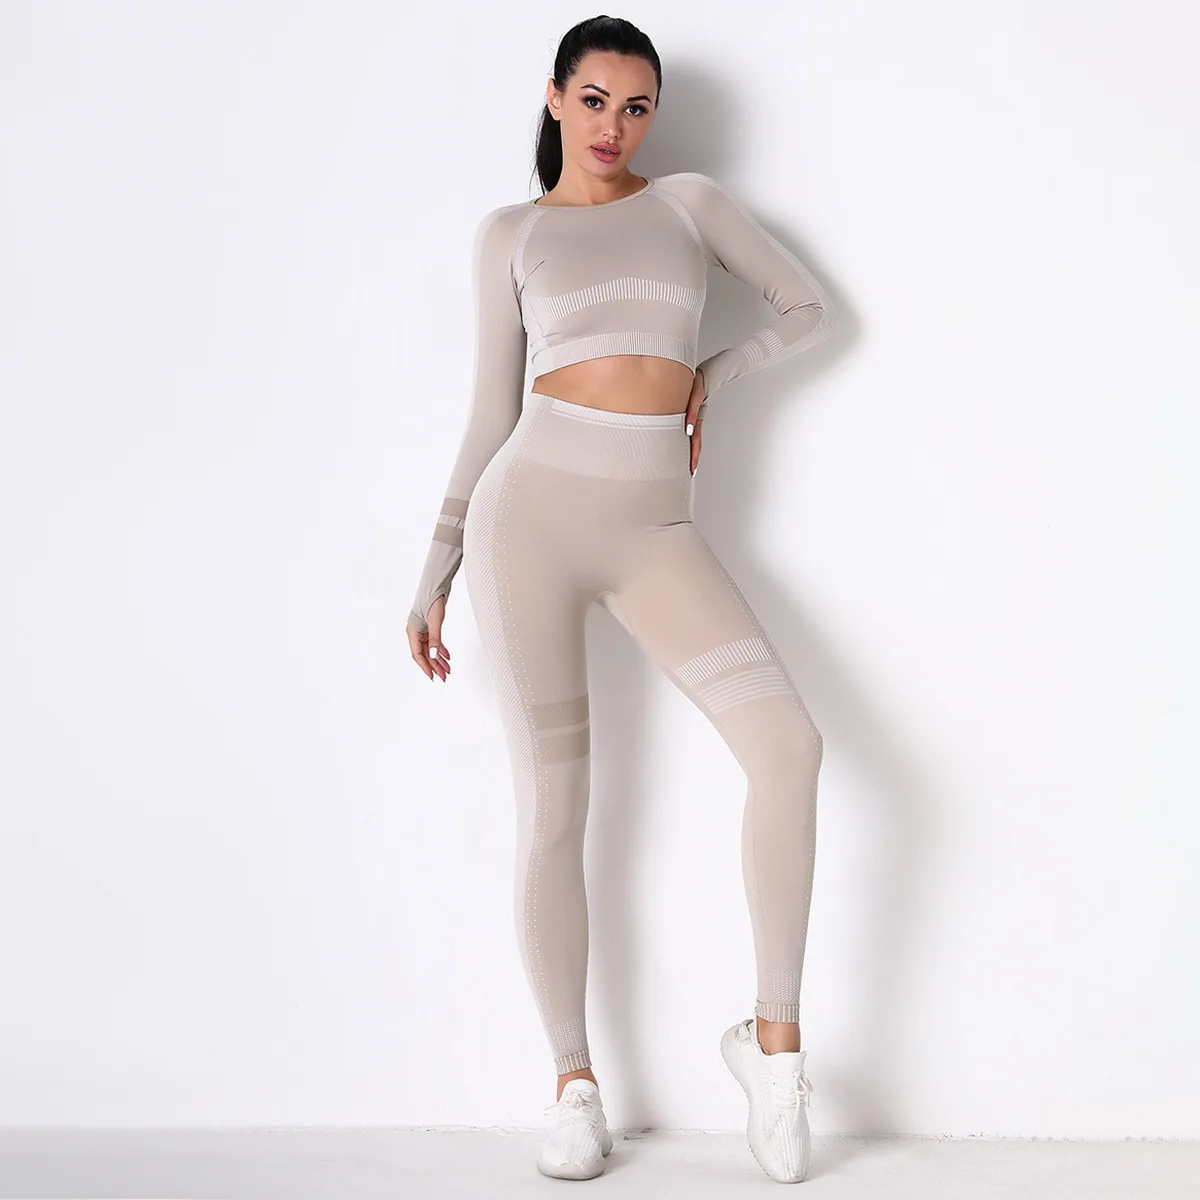 Women's Yoga Gym Crop Top Compression Workout Athletic Suit /long Sleeve  Shirt - Buy Long Sleeve Shirt,Women's Yoga Gym,Workout Athletic Suit  Product on Alibaba.com